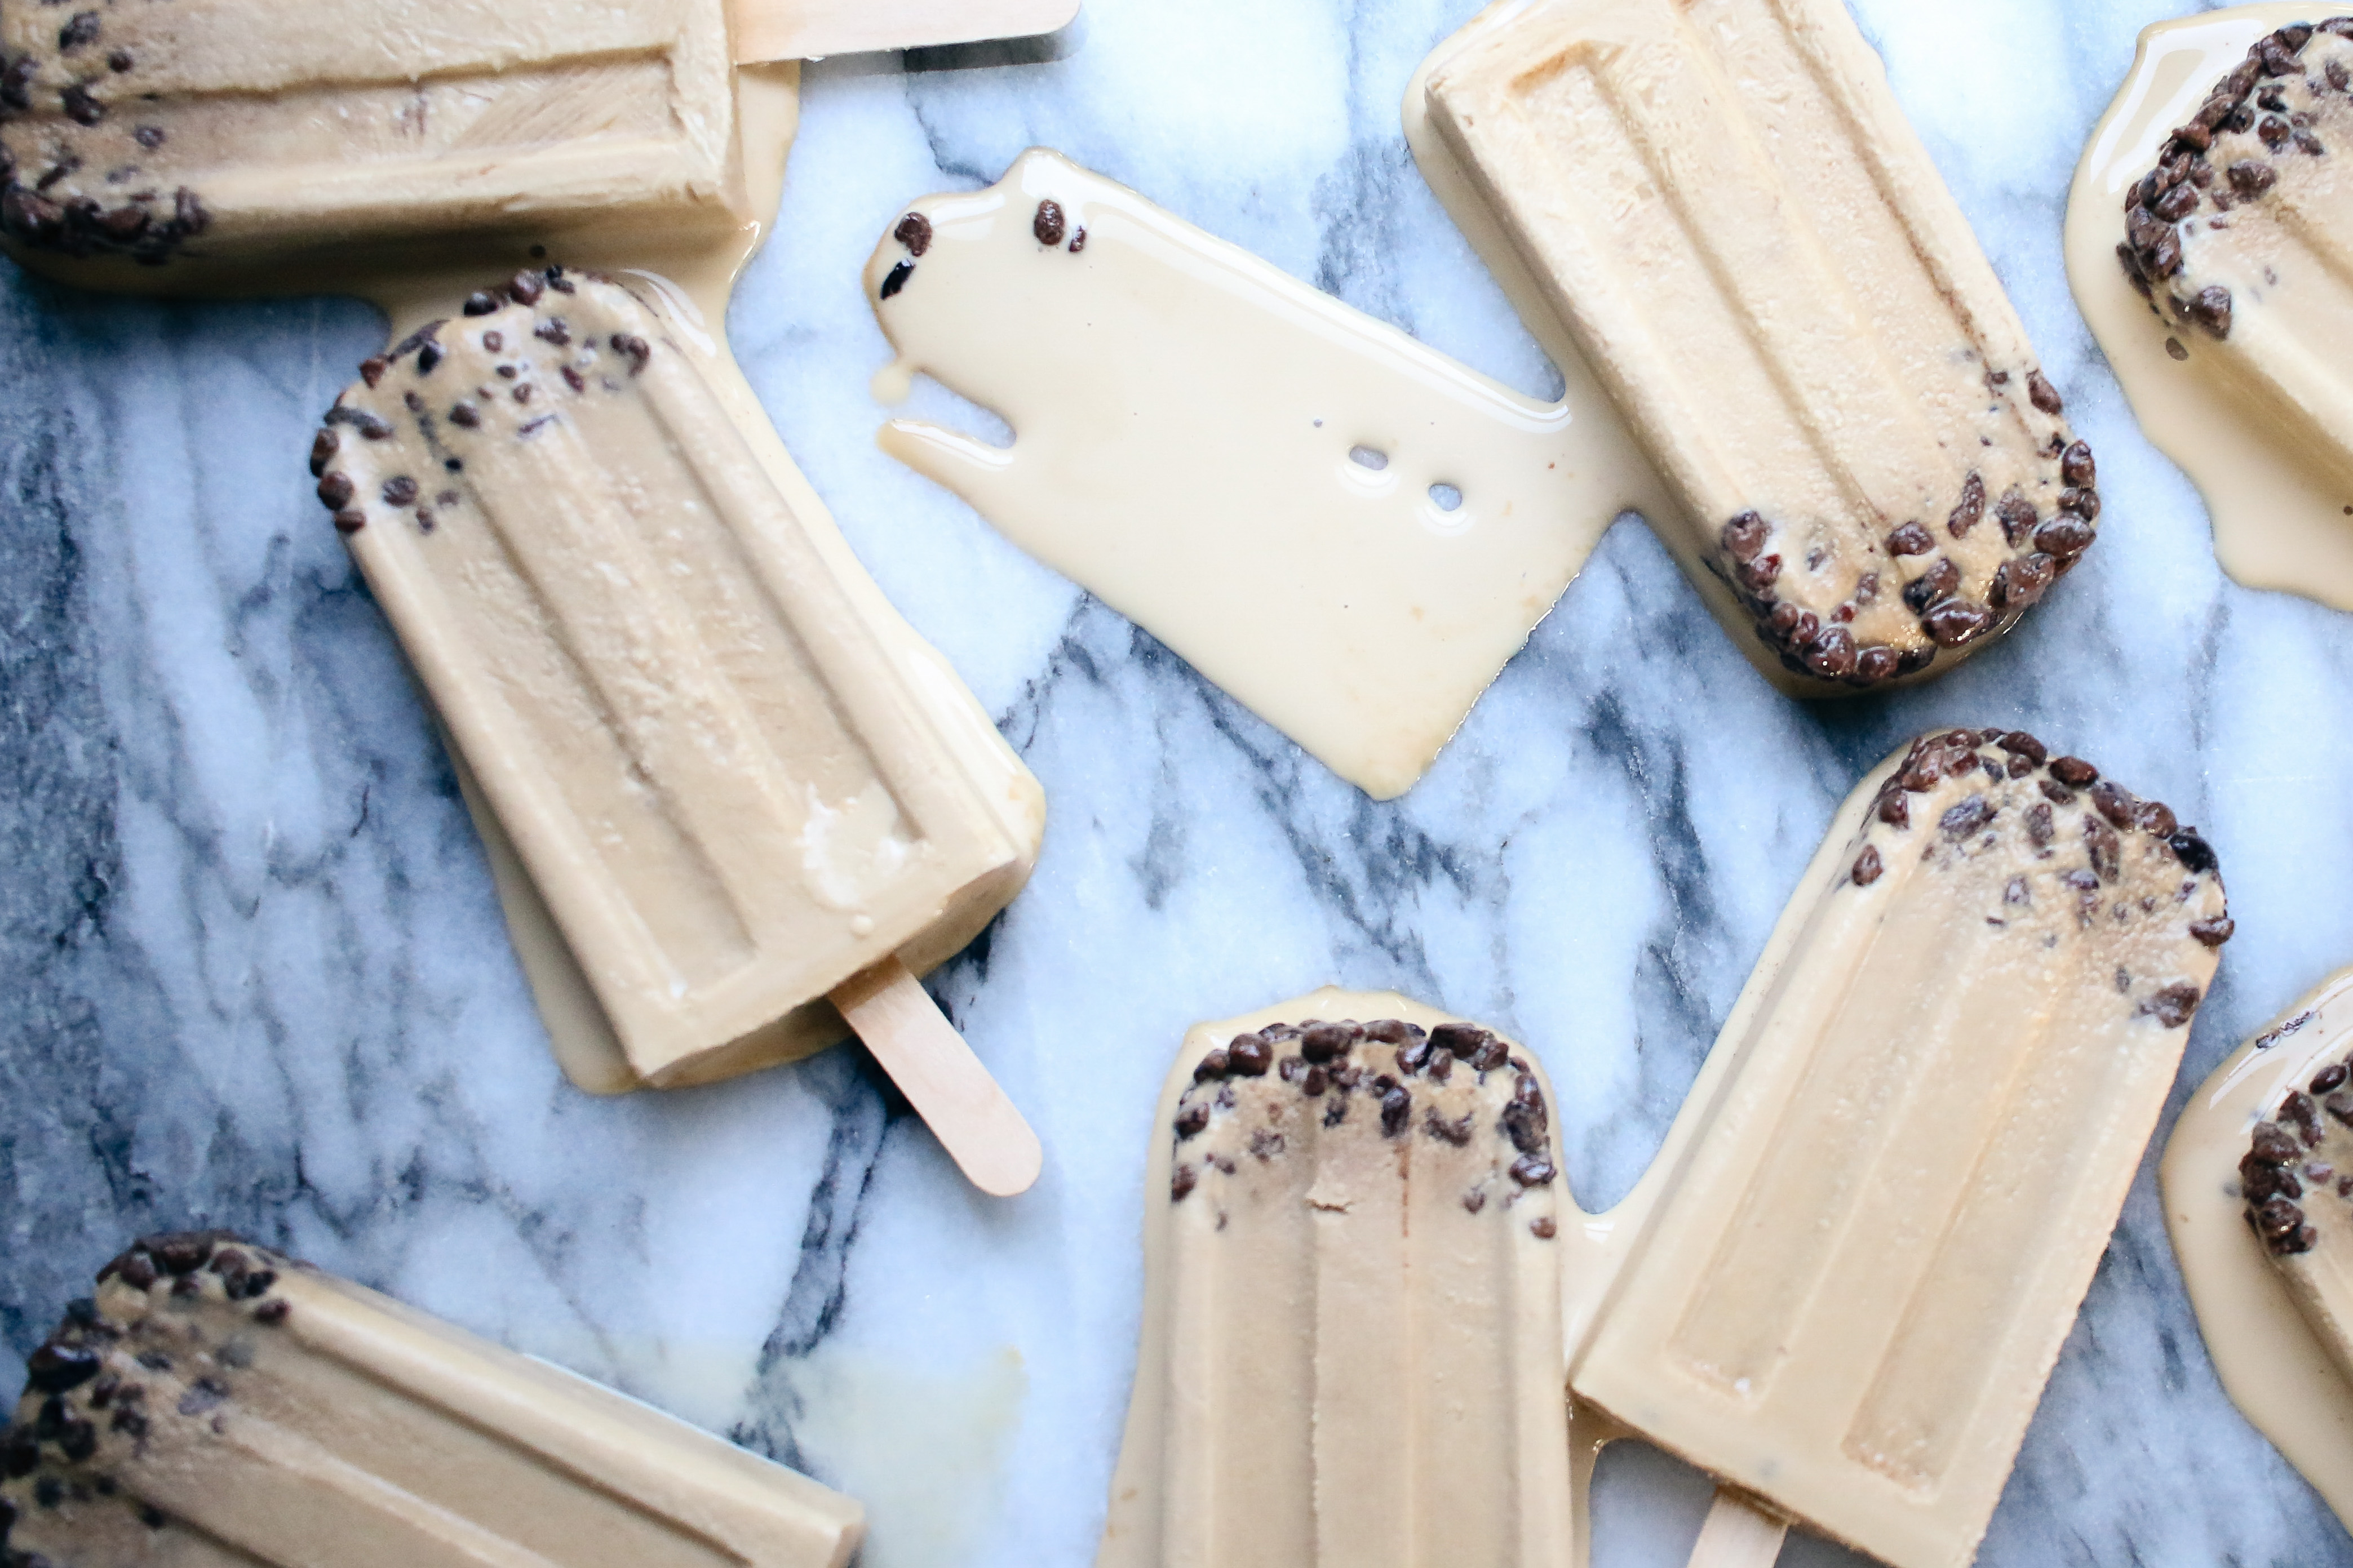 Whiskey Ice Coffee Popsicle with Cocoa Nibs | I Will Not Eat Oysters